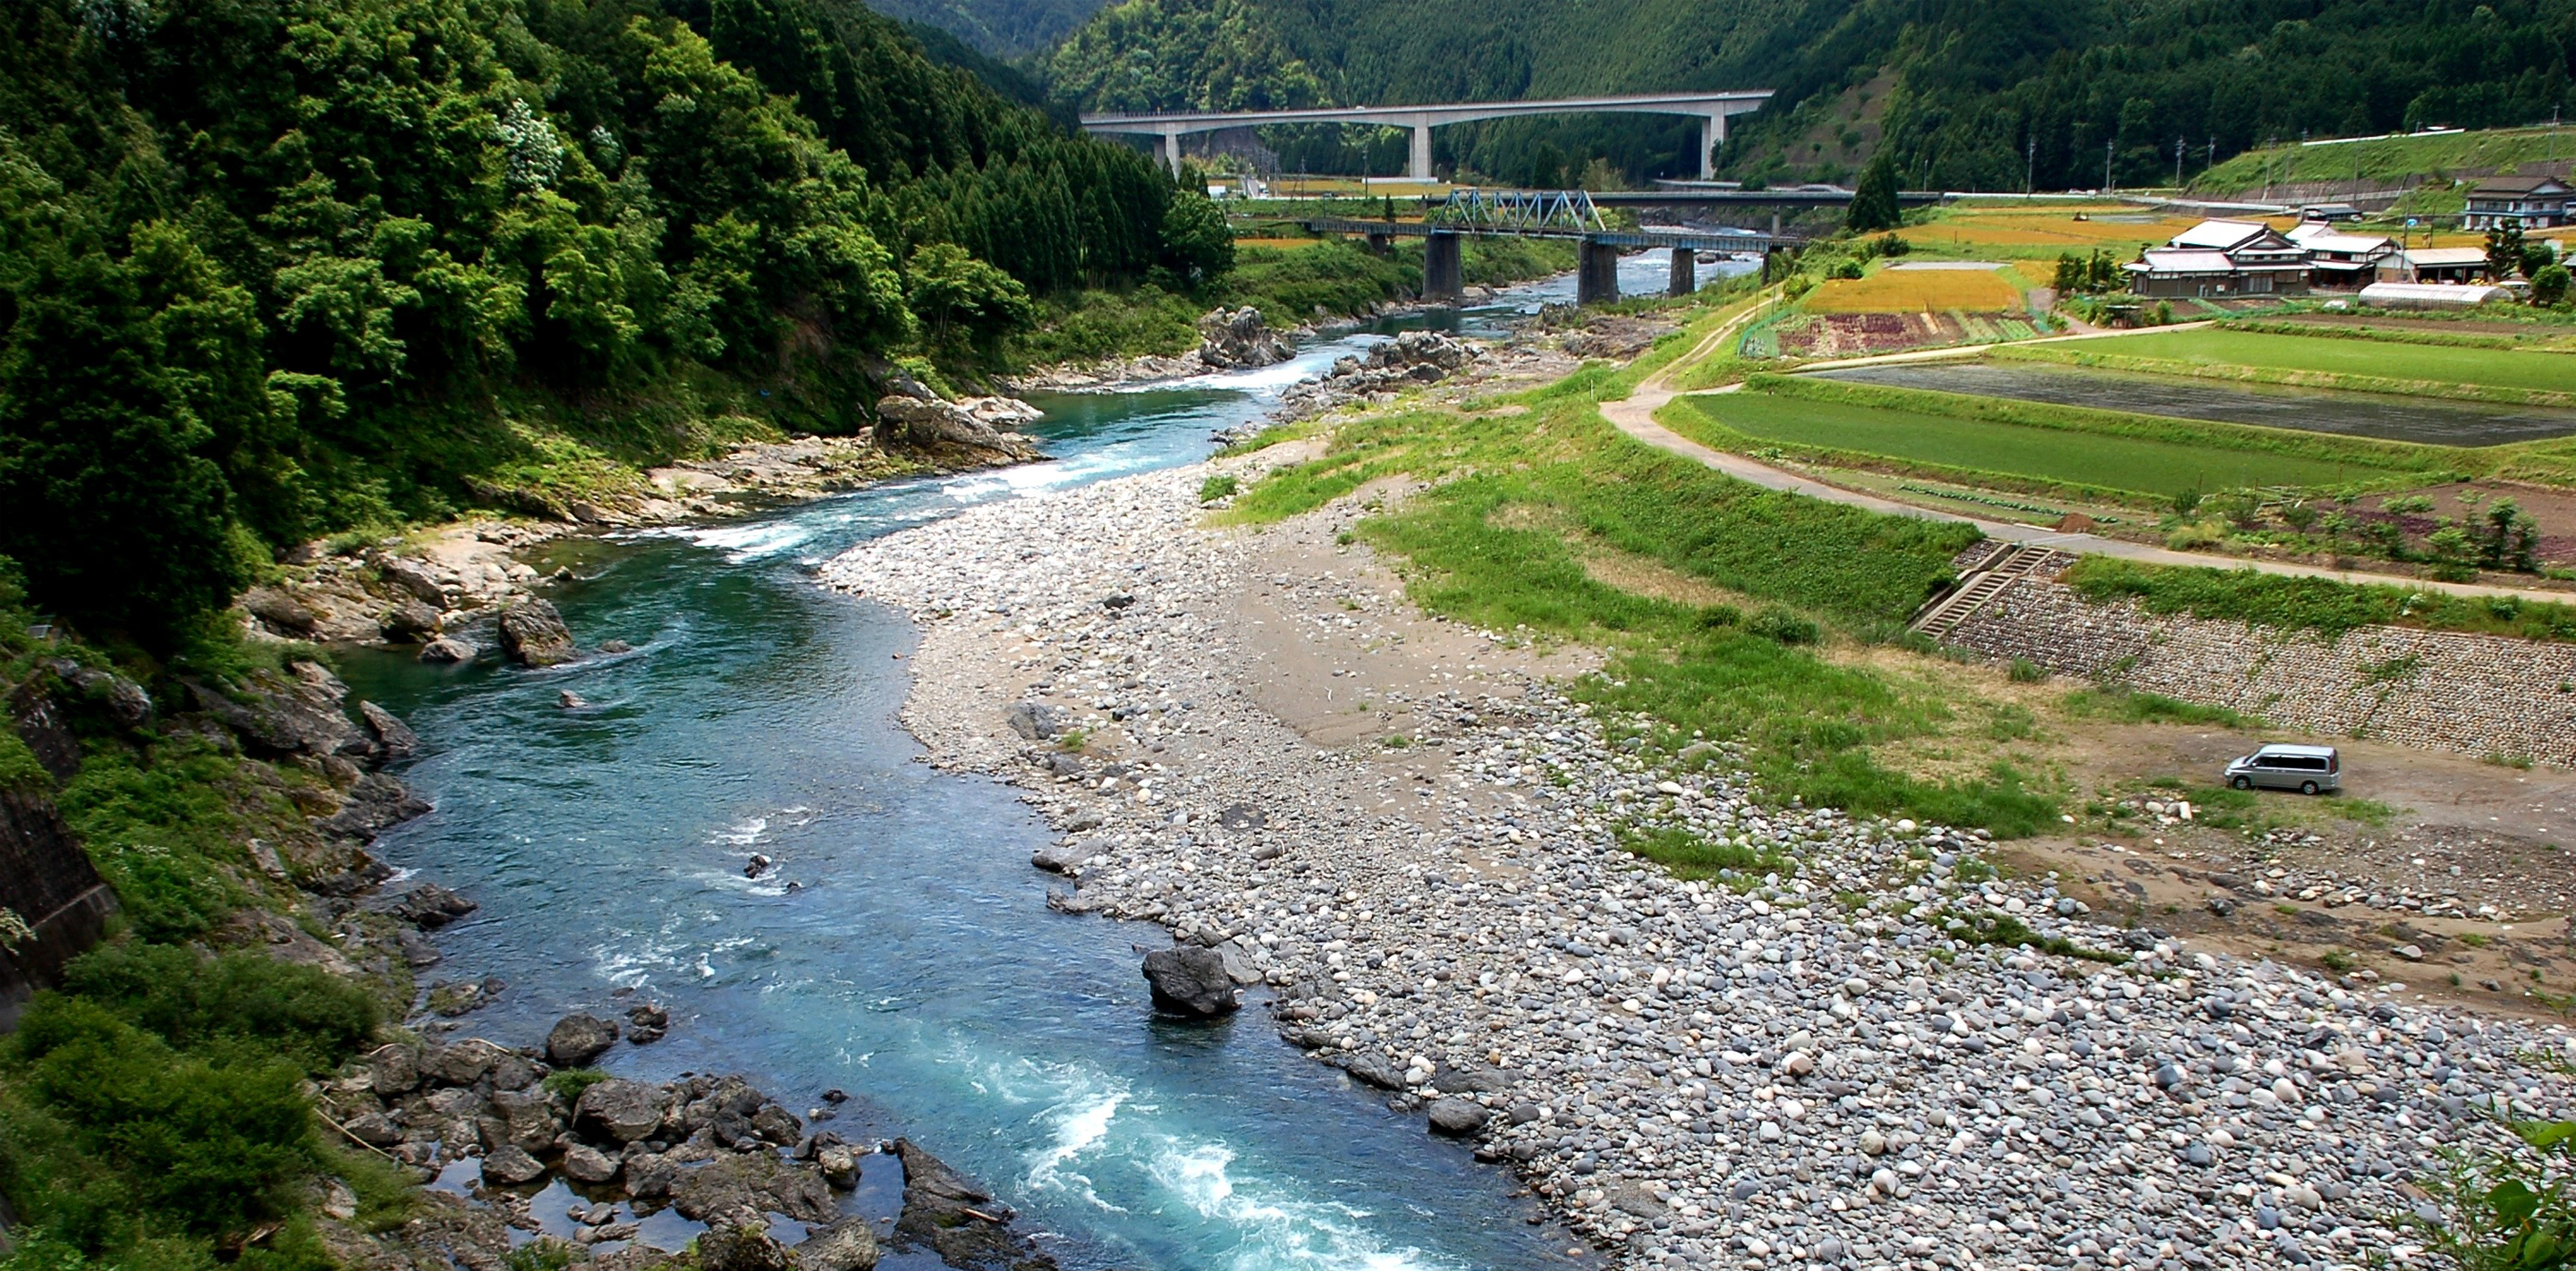 The history of Nagawagawa River and the great river created from the headwater